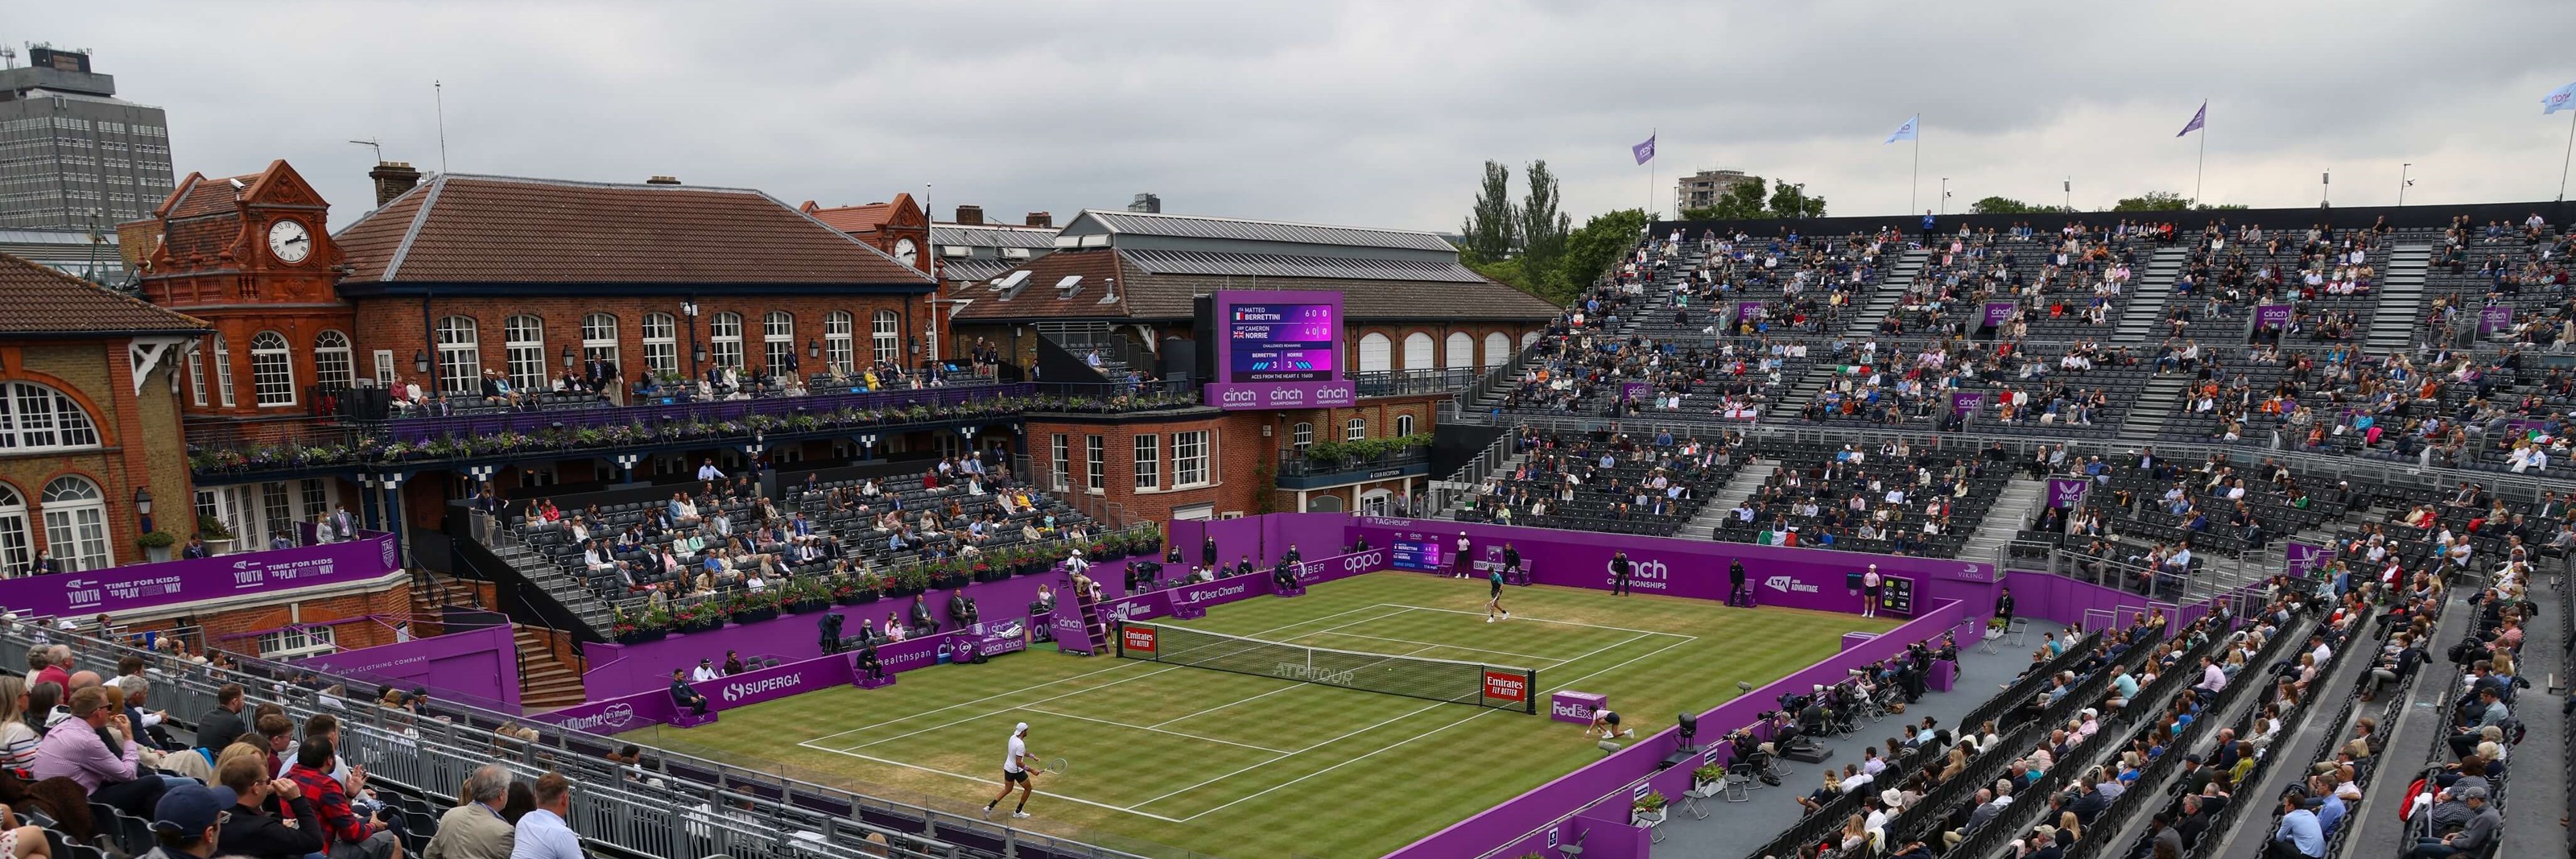 A general view of centre court during Day 7 of The cinch Championships at The Queen's Club on June 20, 2021